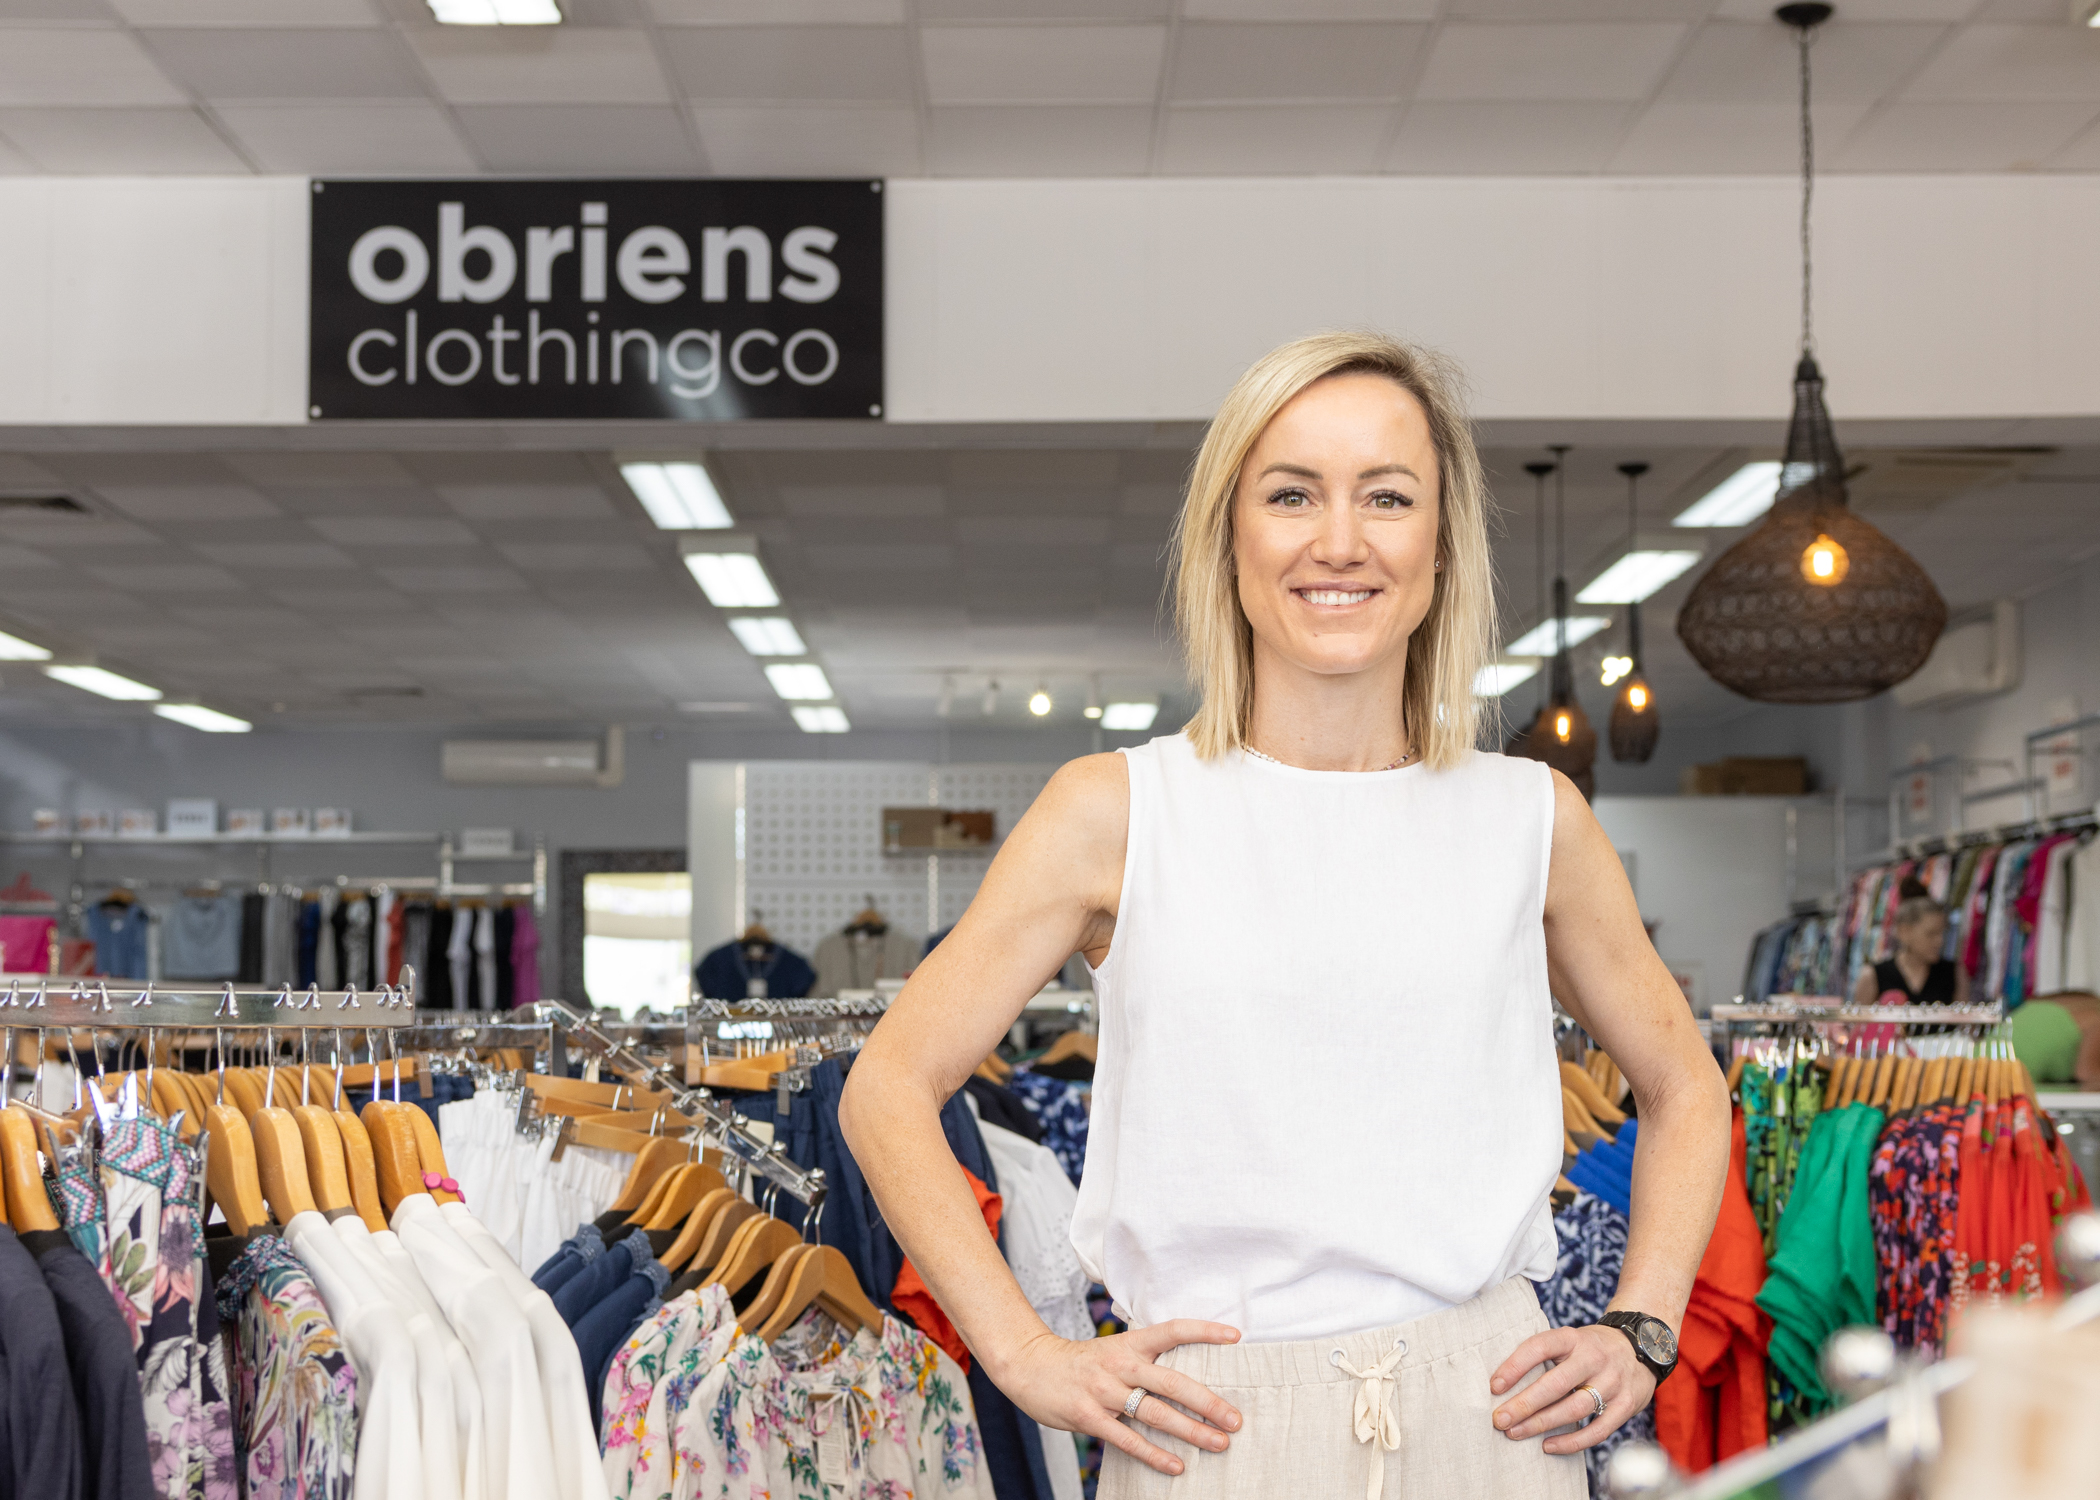 Person stands in front of a sign saying "obriens clothing co" in a clothing store